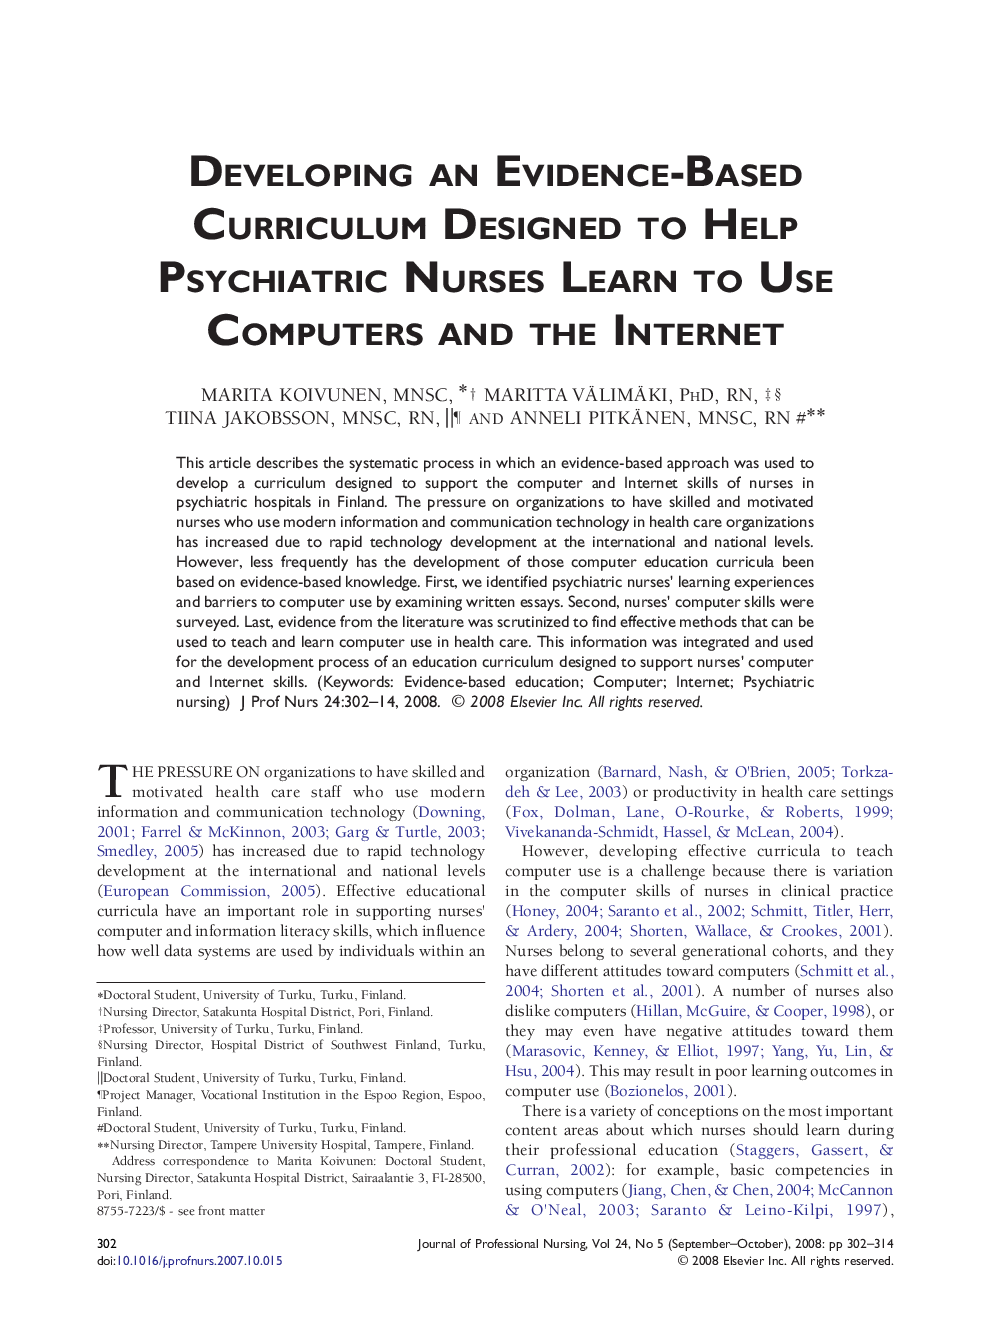 Developing an Evidence-Based Curriculum Designed to Help Psychiatric Nurses Learn to Use Computers and the Internet